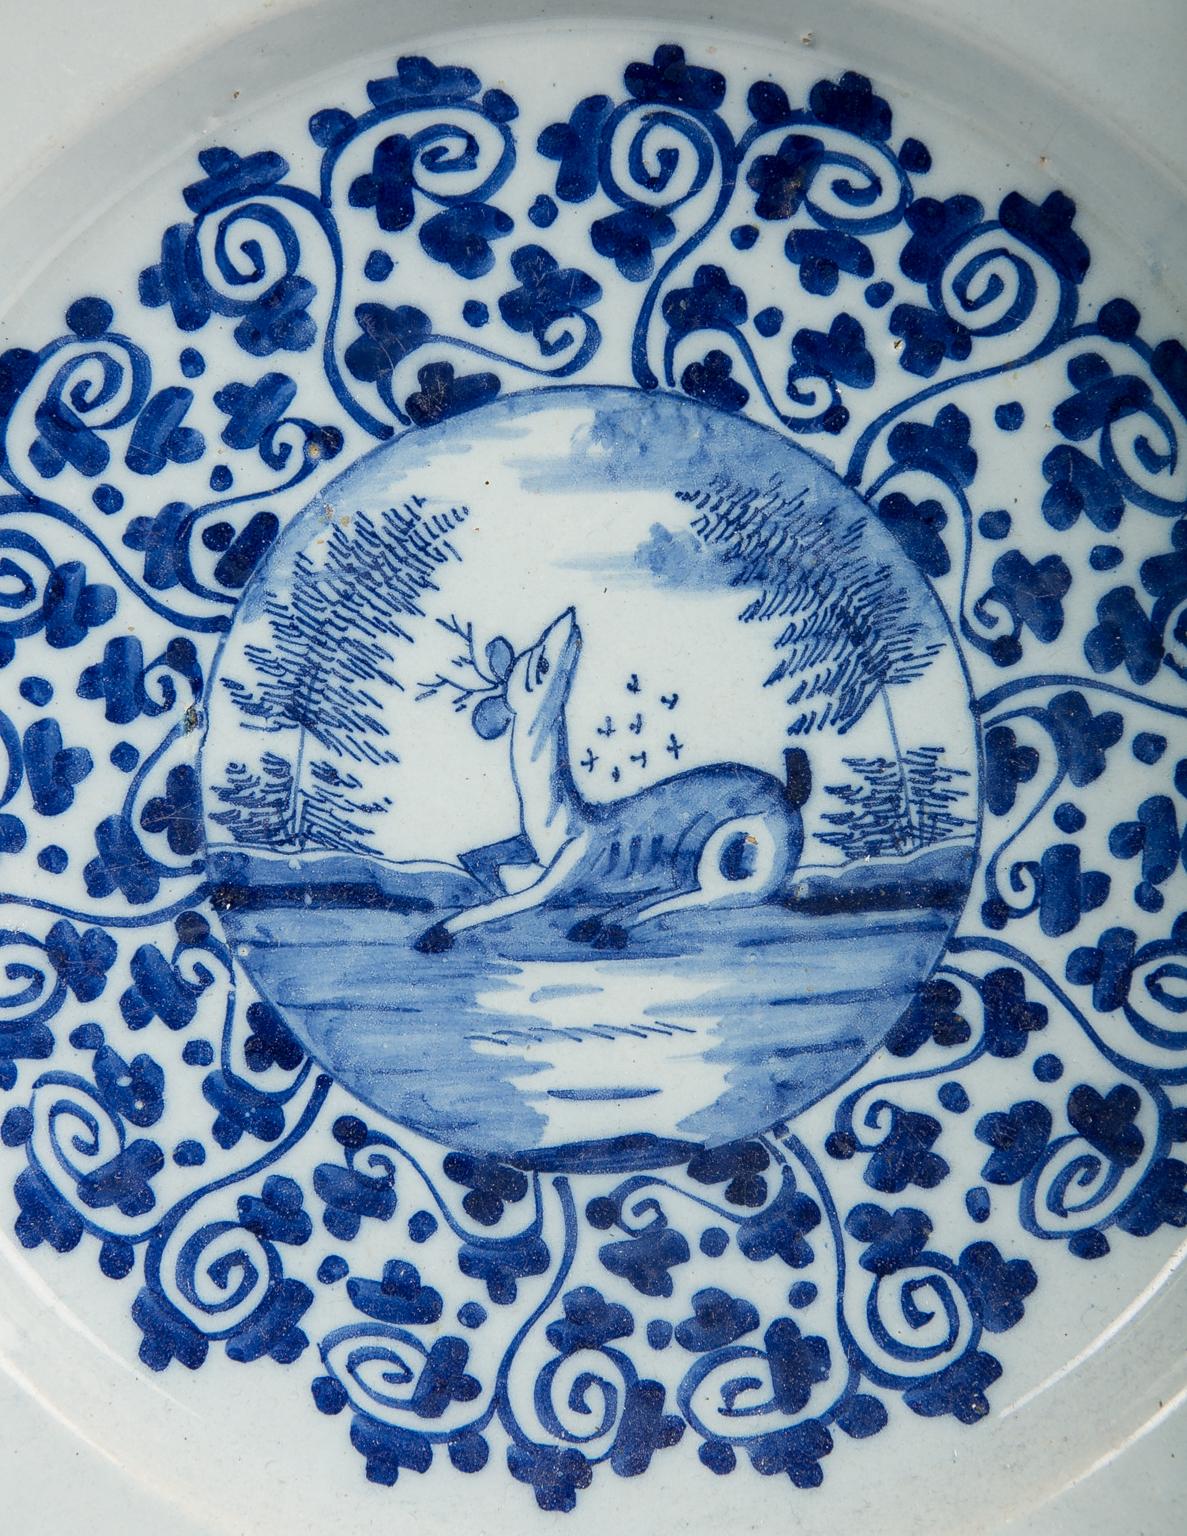 An exquisite blue and white Dutch Delft charger showing a deer in a clearing in the forest. The deer is painted in a roundel at the centre of the charger. Around it are two circles of scrolling leaves. The overall effect is beautiful.
Dimensions: